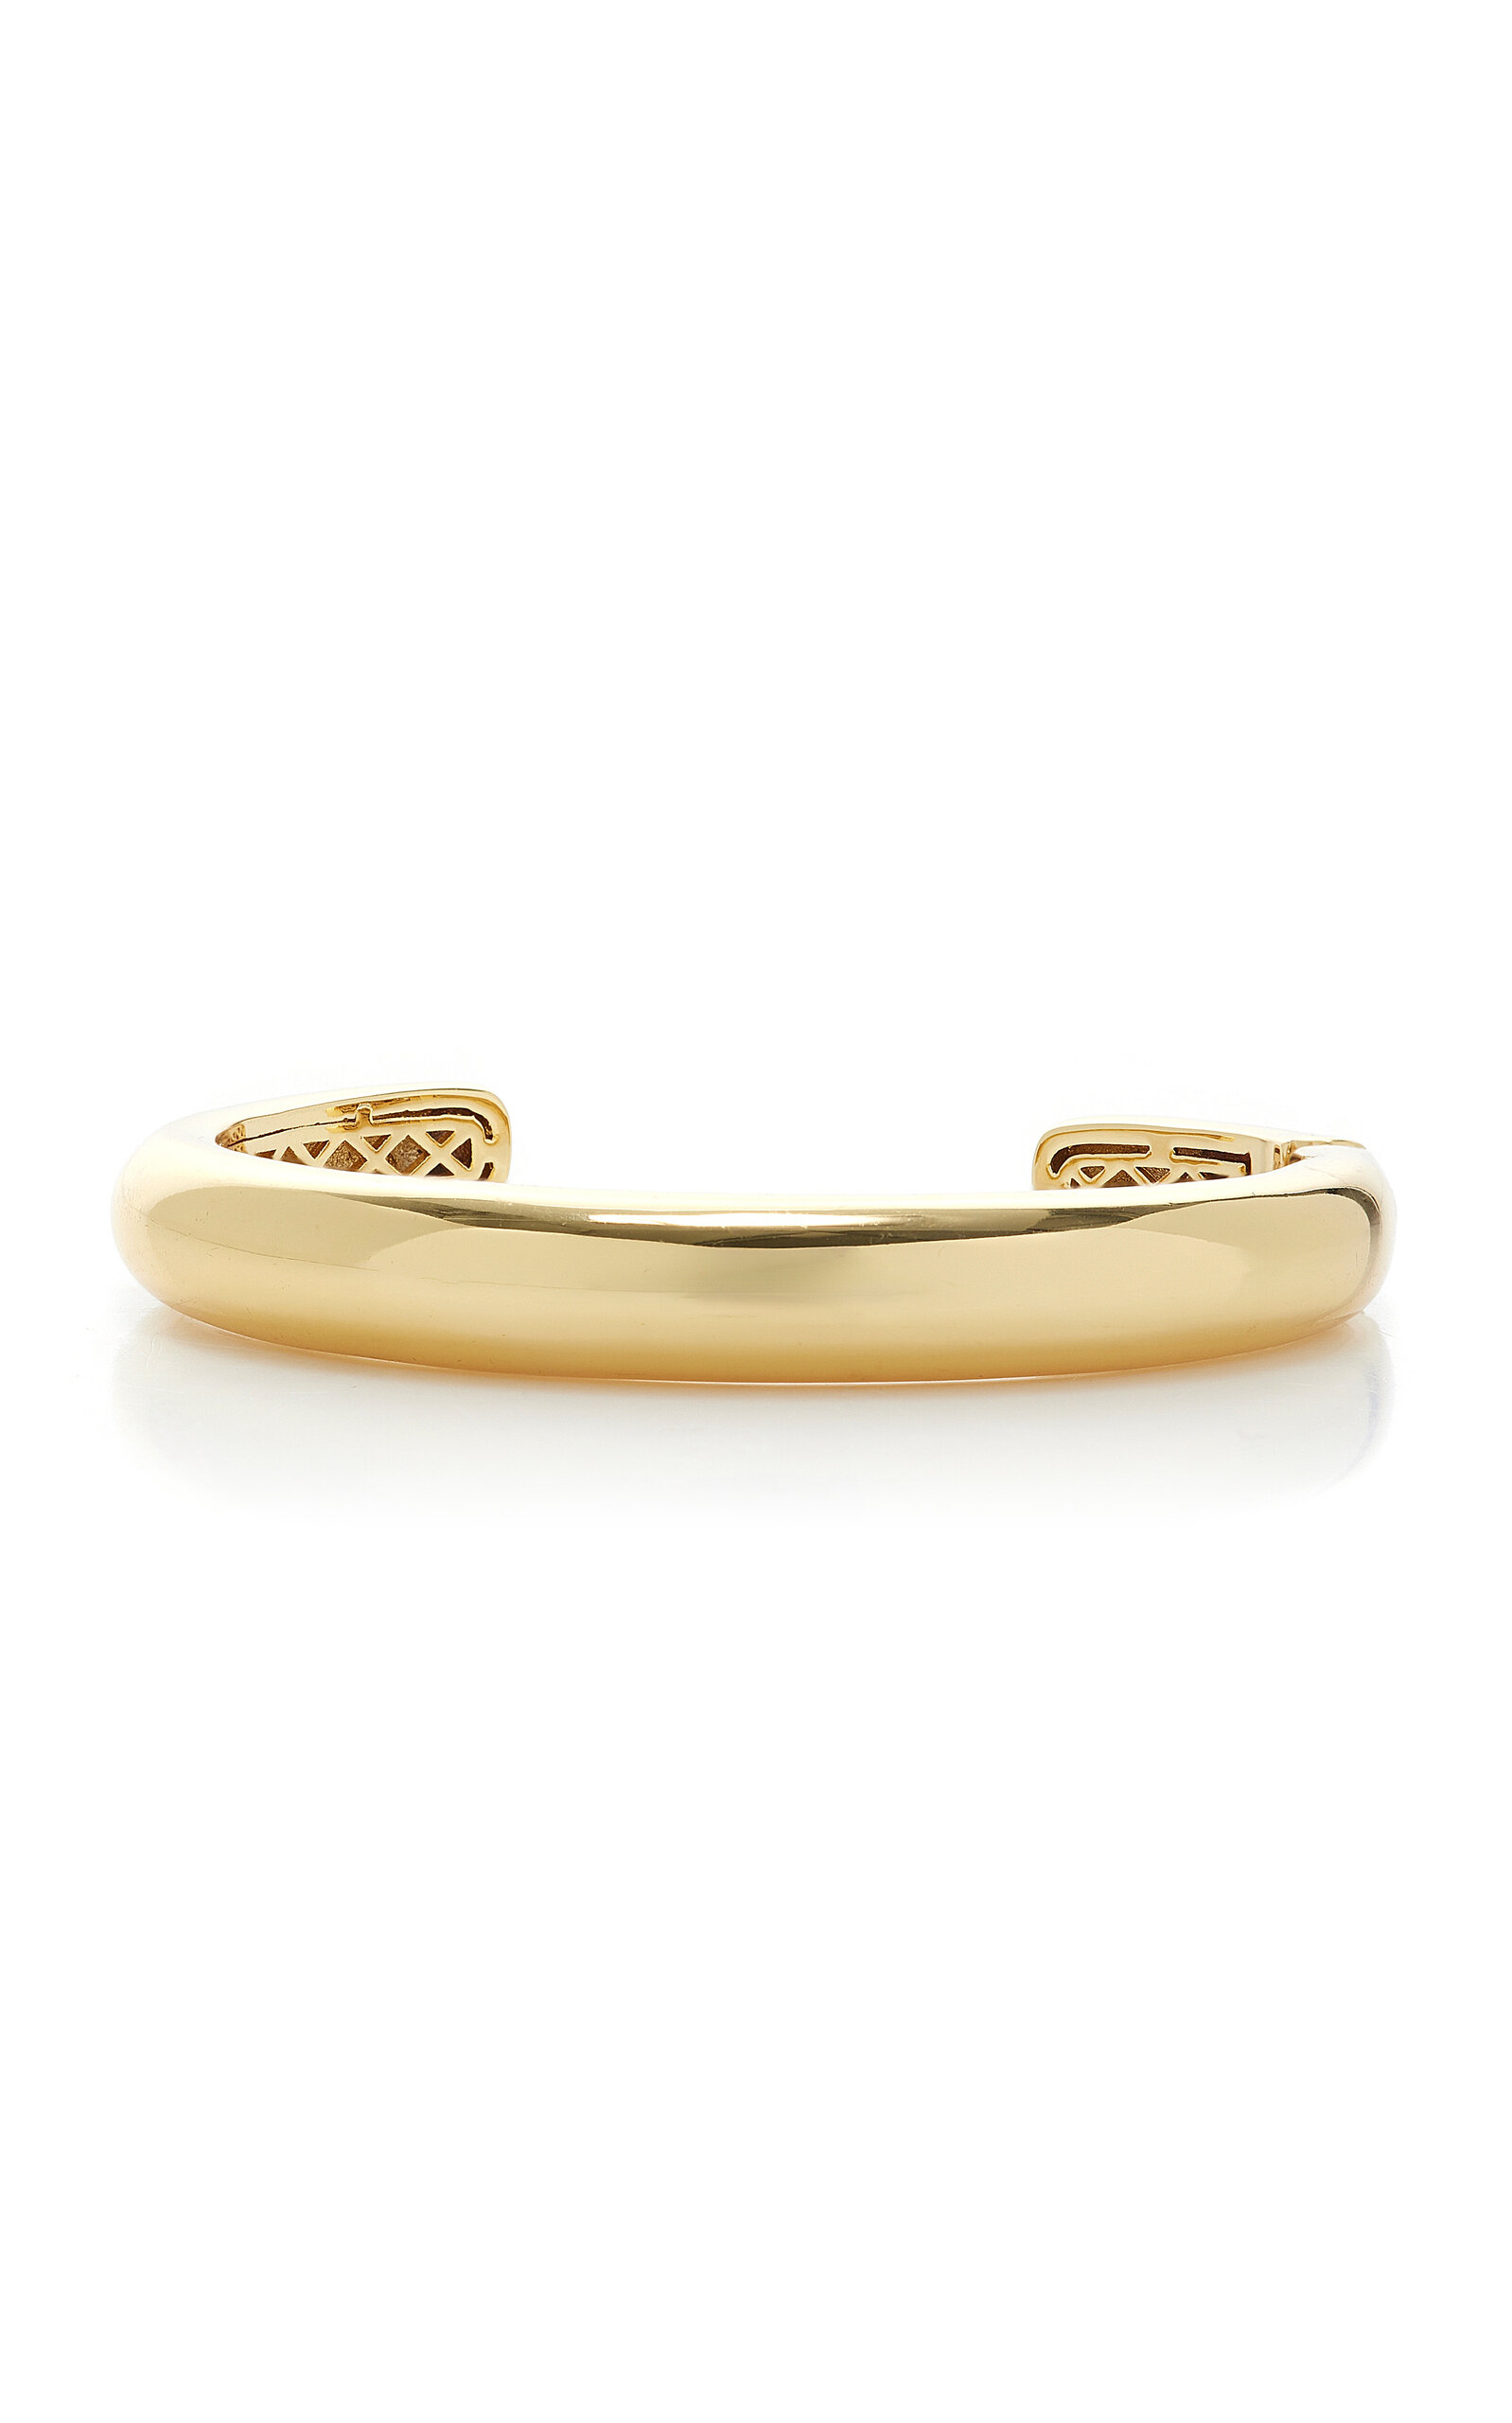 Exclusive 24K Gold-Plated Cuff